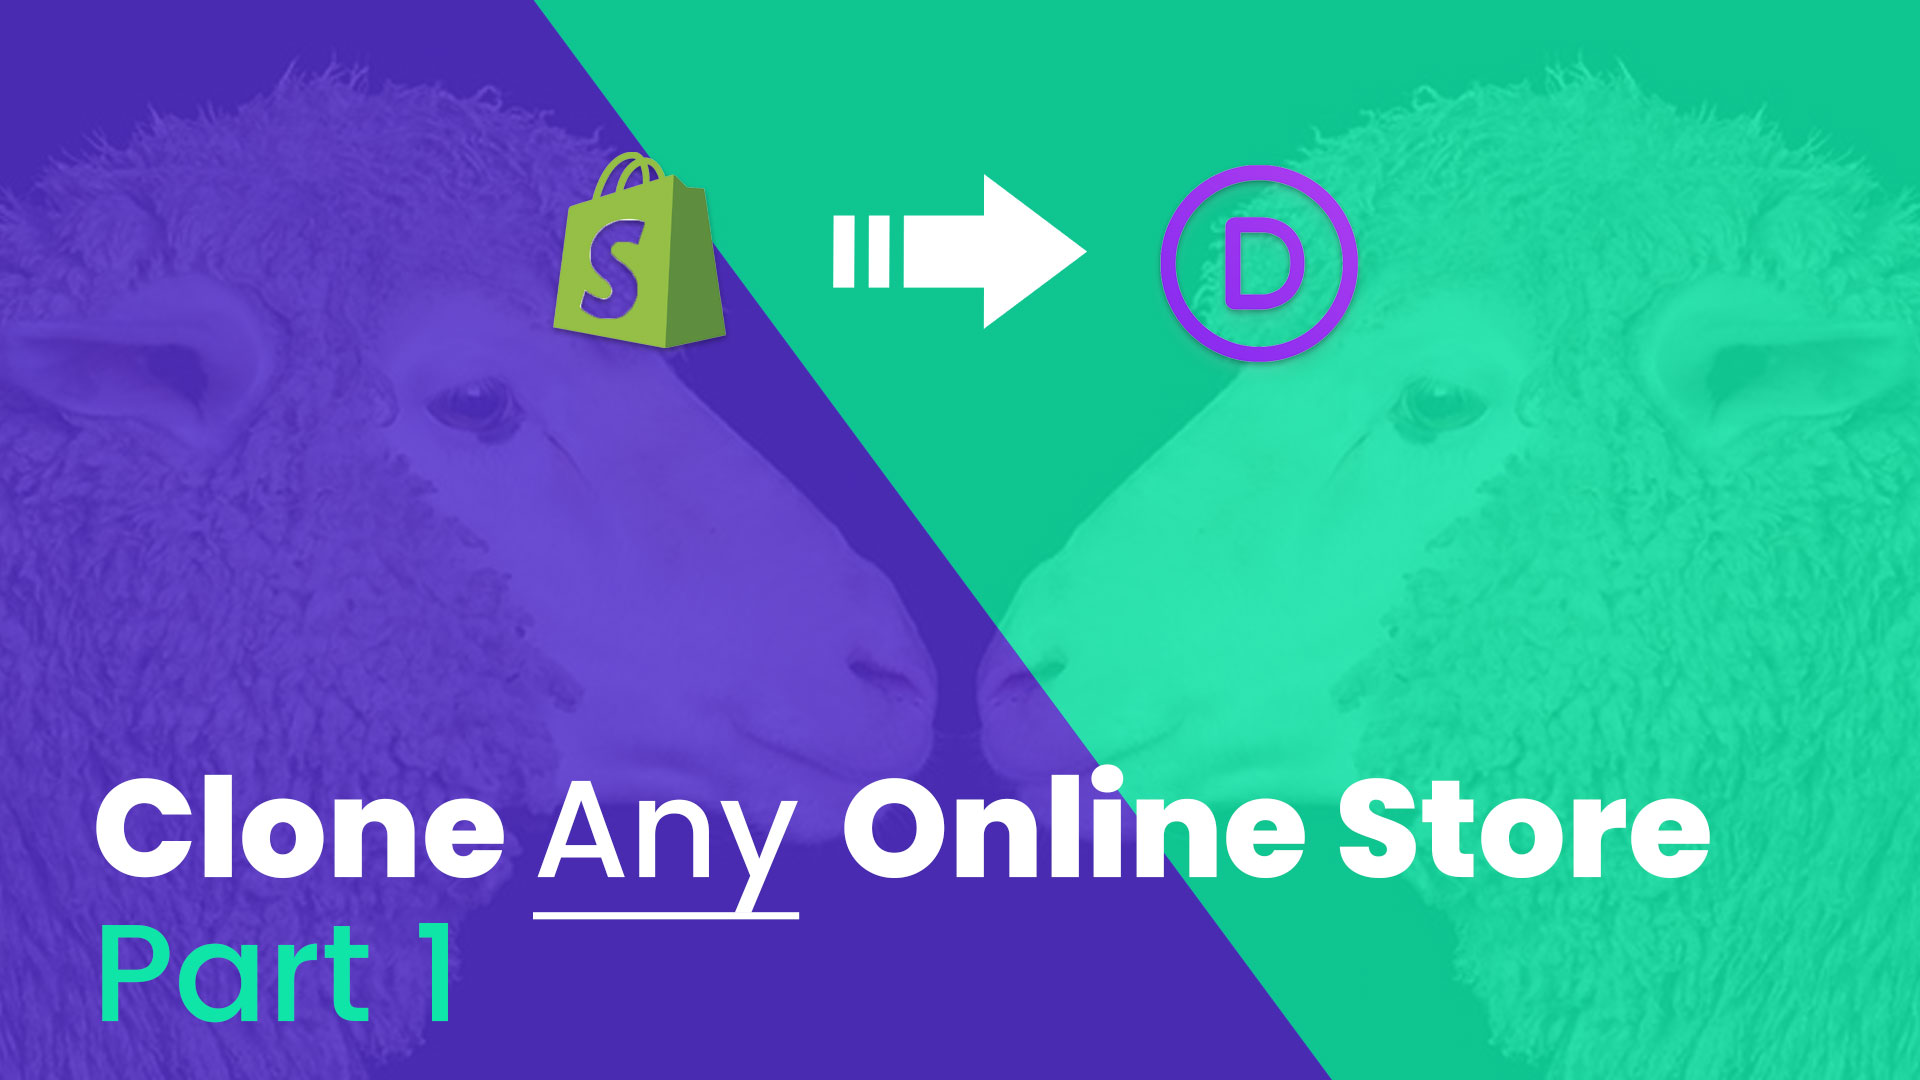 Clone Any Online Store Tutorial Series: Part 1